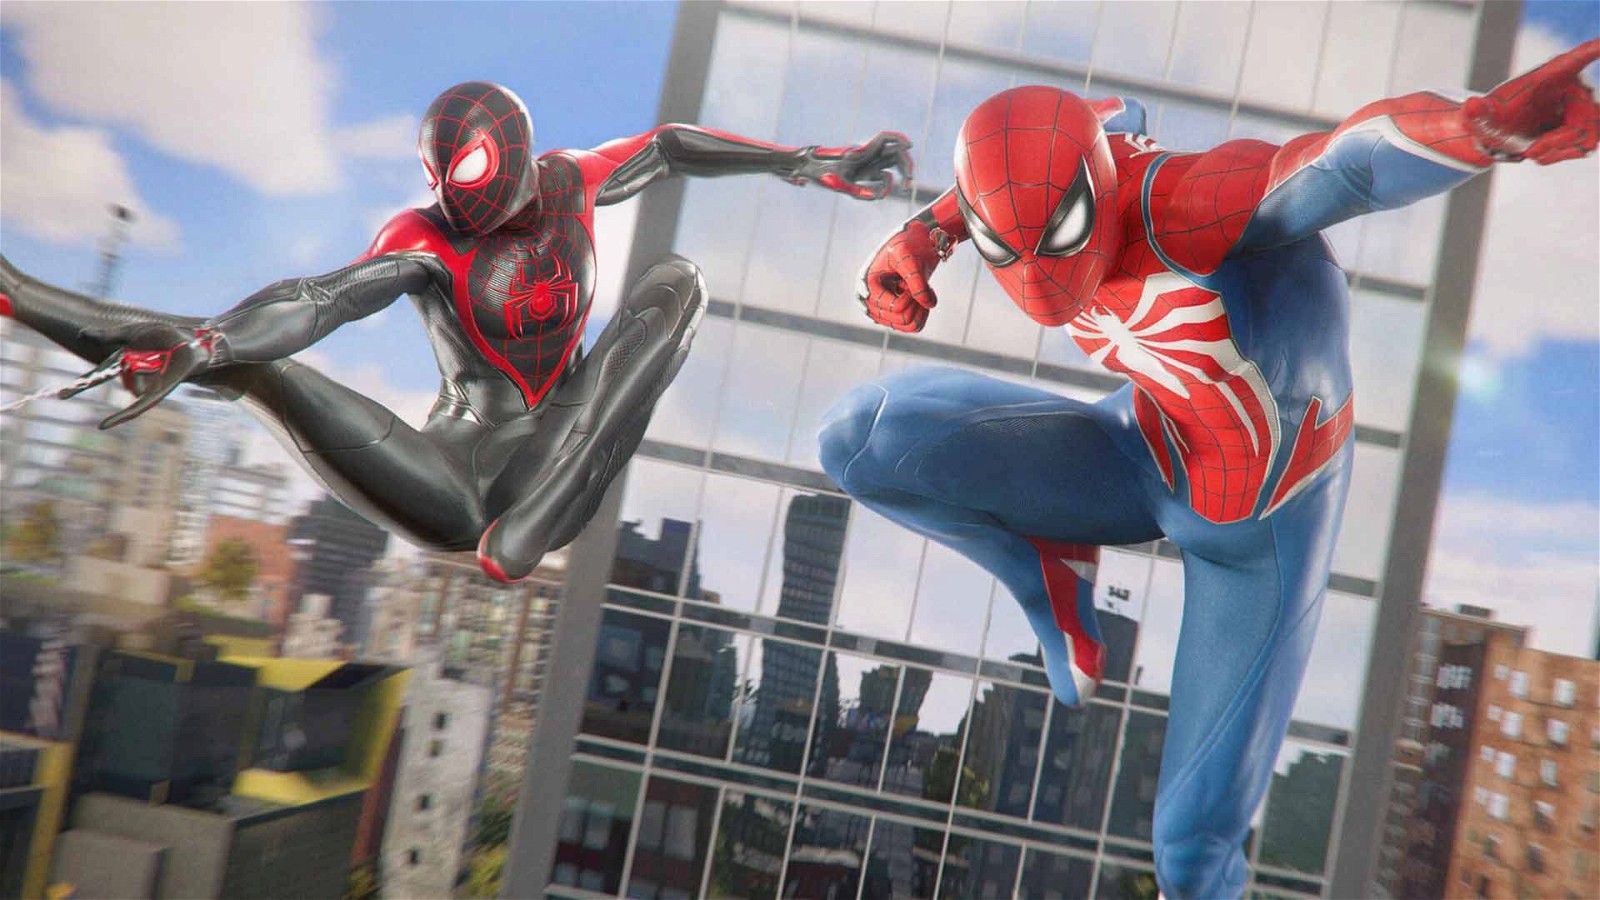 Marvel's Spider-Man 2 will release exclusively for PS5 on October 20th